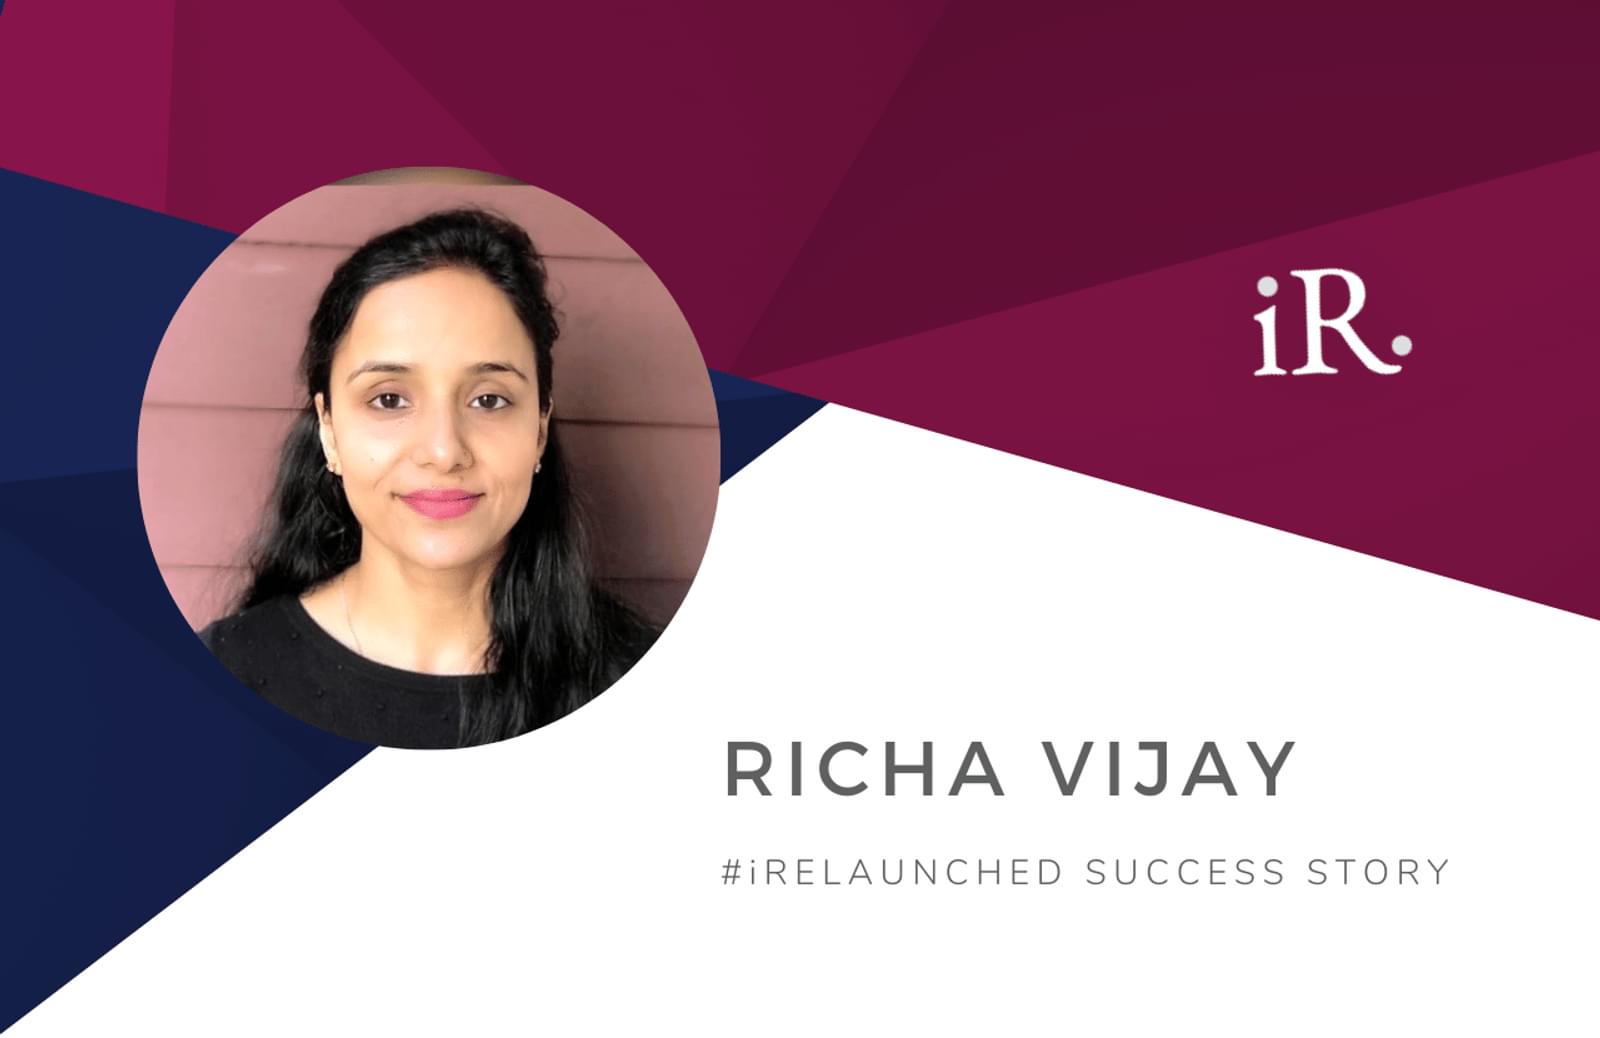 Richa Vijay's headshot and the text #iRelaunched Success Story along with the iRelaunch logo.  A navy and maroon geometric textured background intersect behind Richa's headshot.